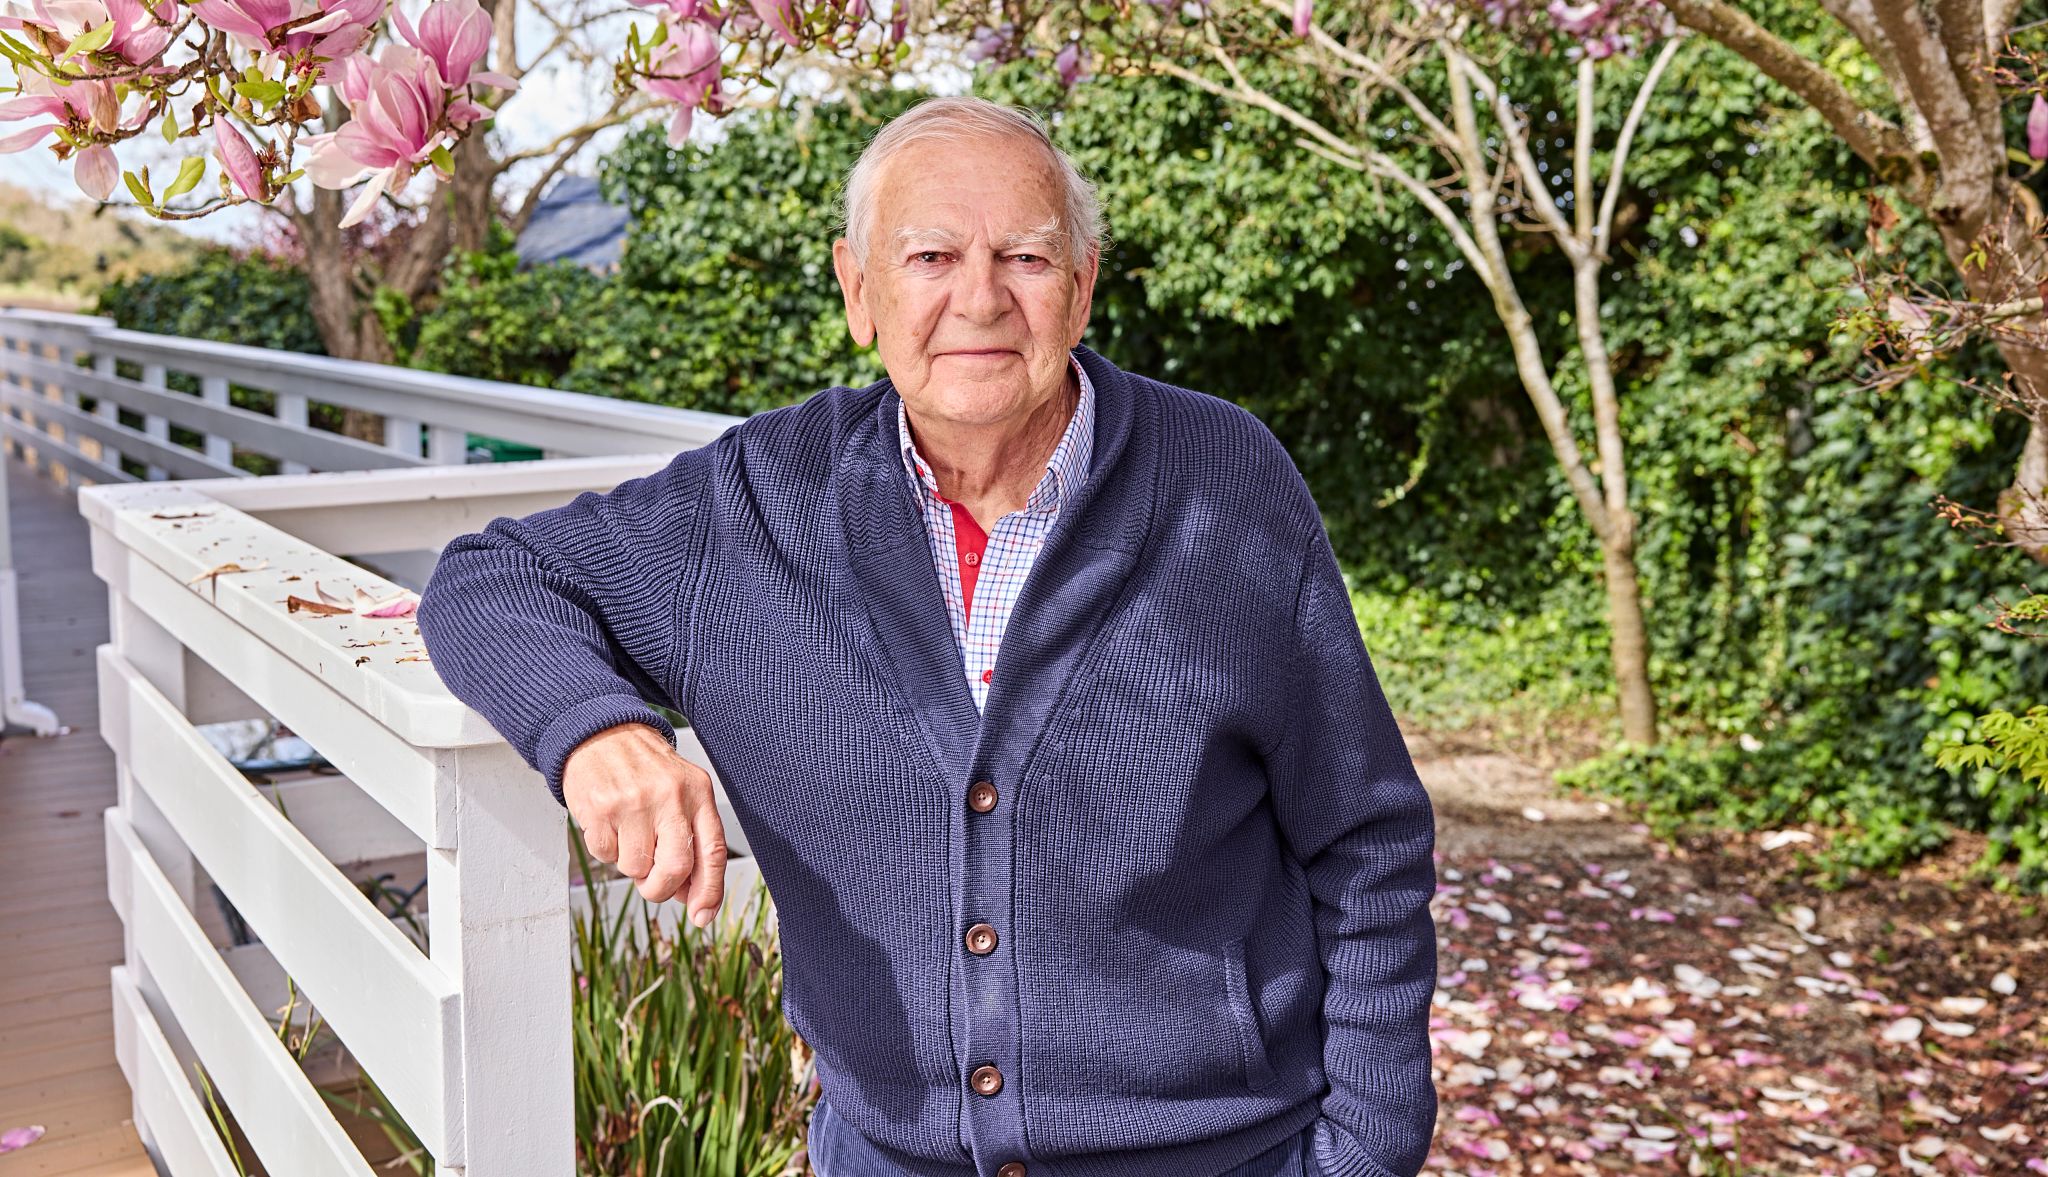 Don Johanson leaning up against white fence with trees behind him